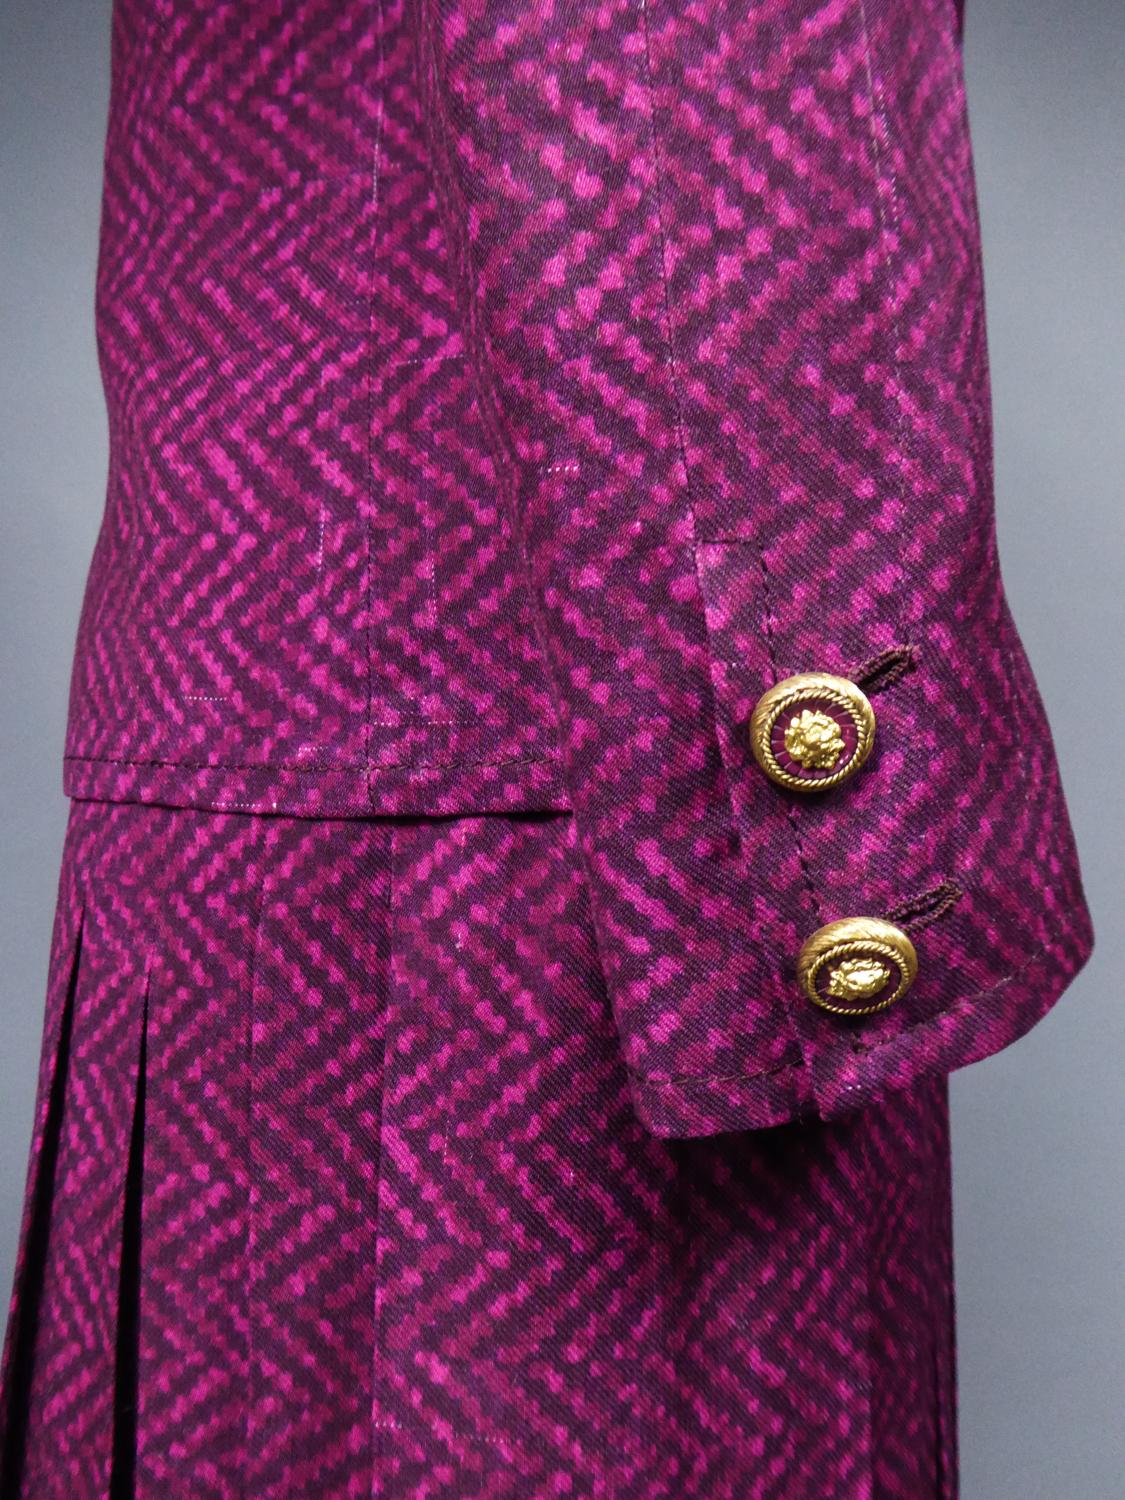 A French Couture Silk Chanel Skirt and Jacket Suit number 60423 & 60422 C. 1980 For Sale 7